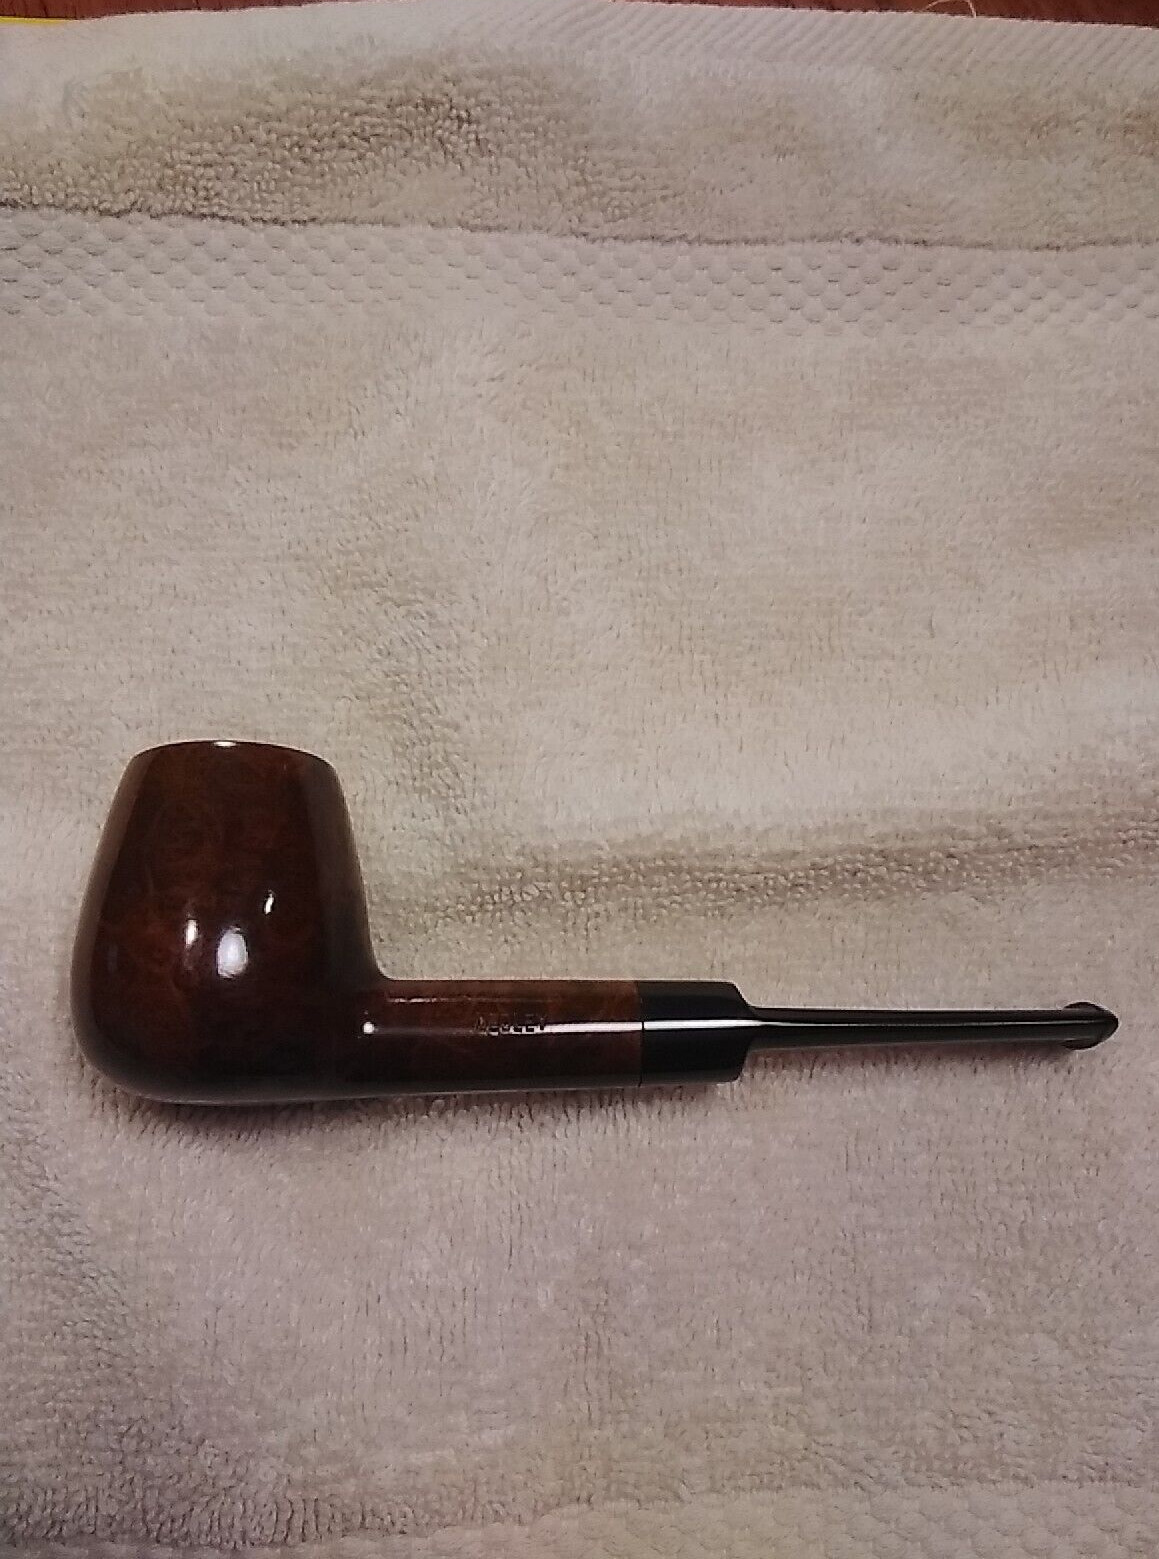 MEDLEY,London England made, over 40 years old unsmoked Pear style in Walnut. 